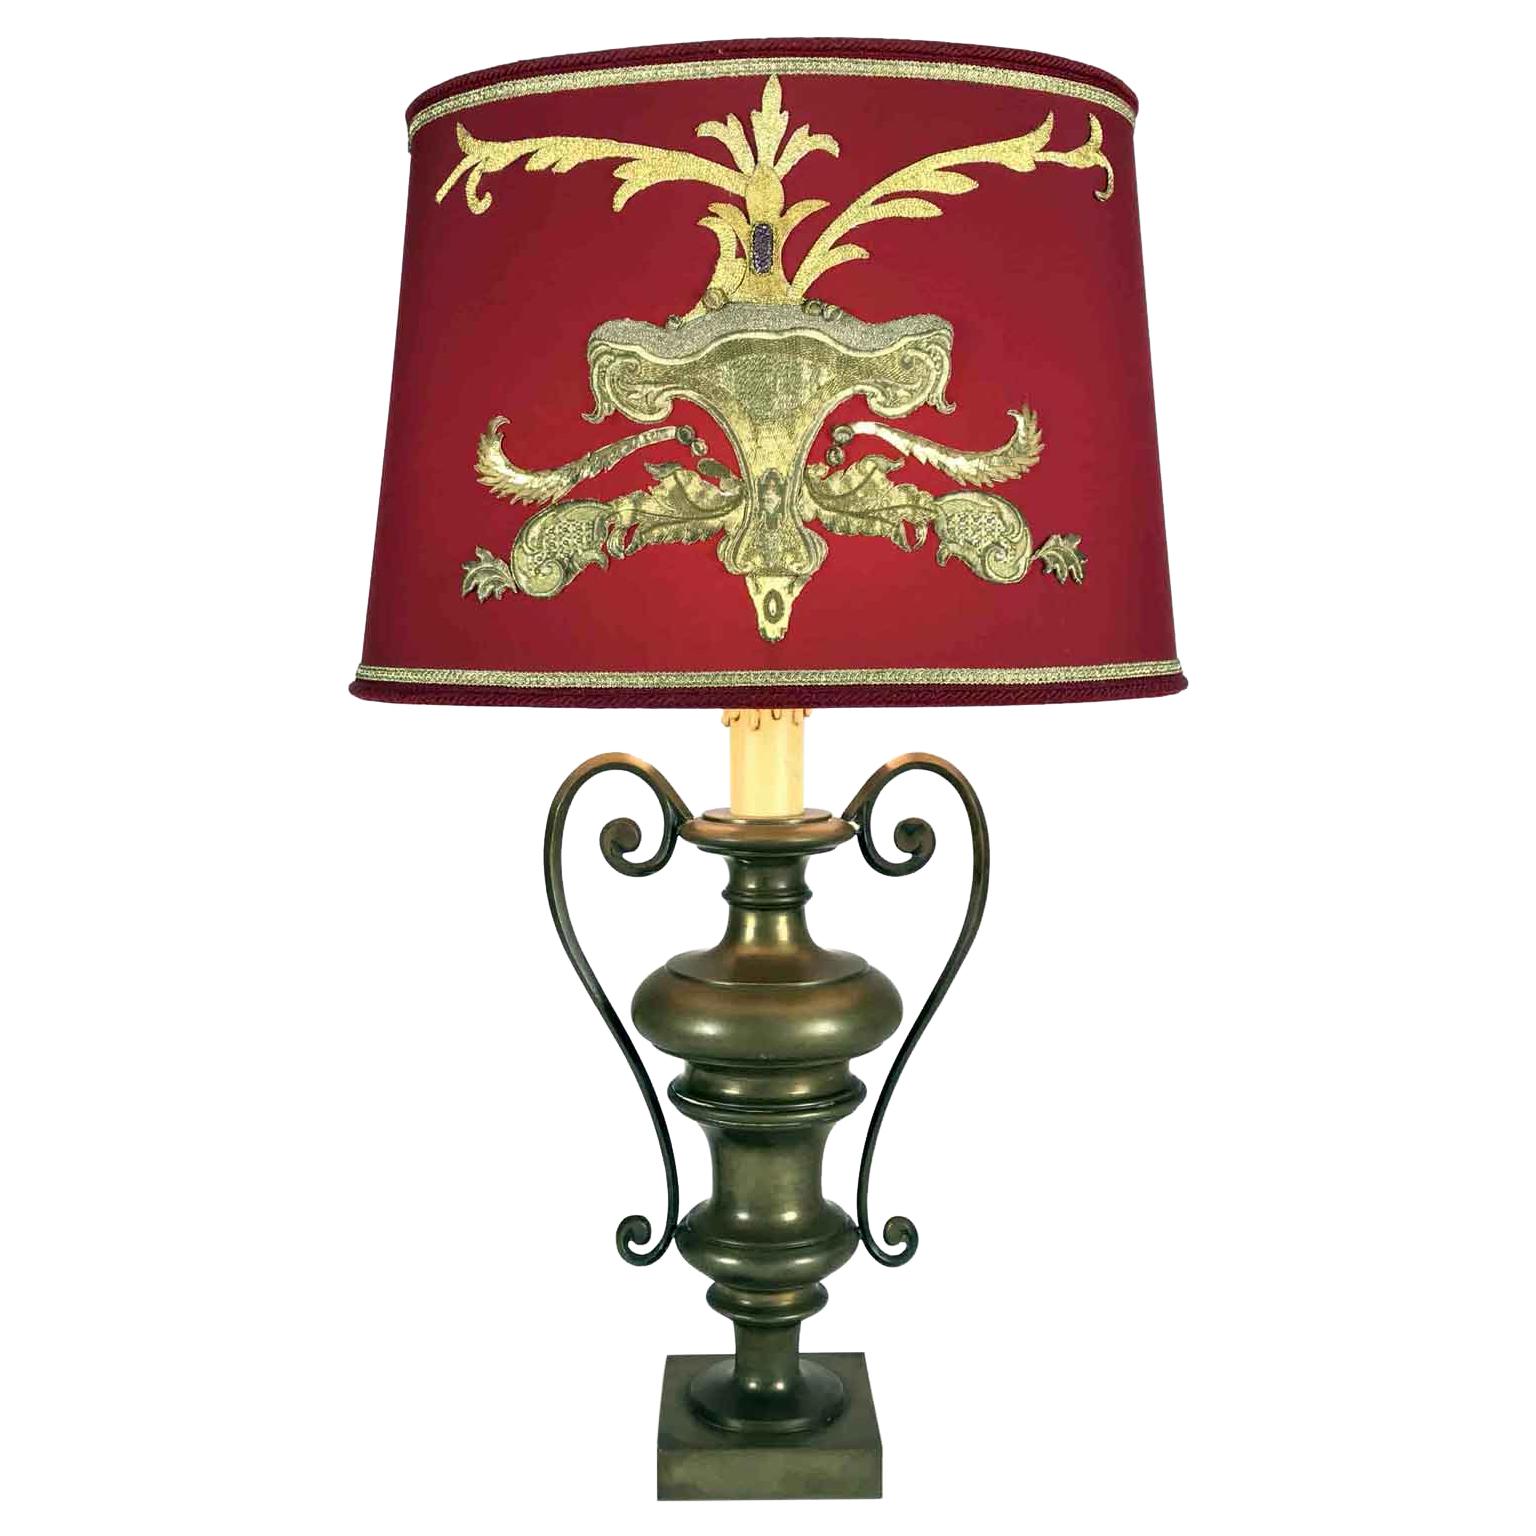 20th Century Italian Empire Bronze Table Lamp Red Lampshade Golden Embroideries